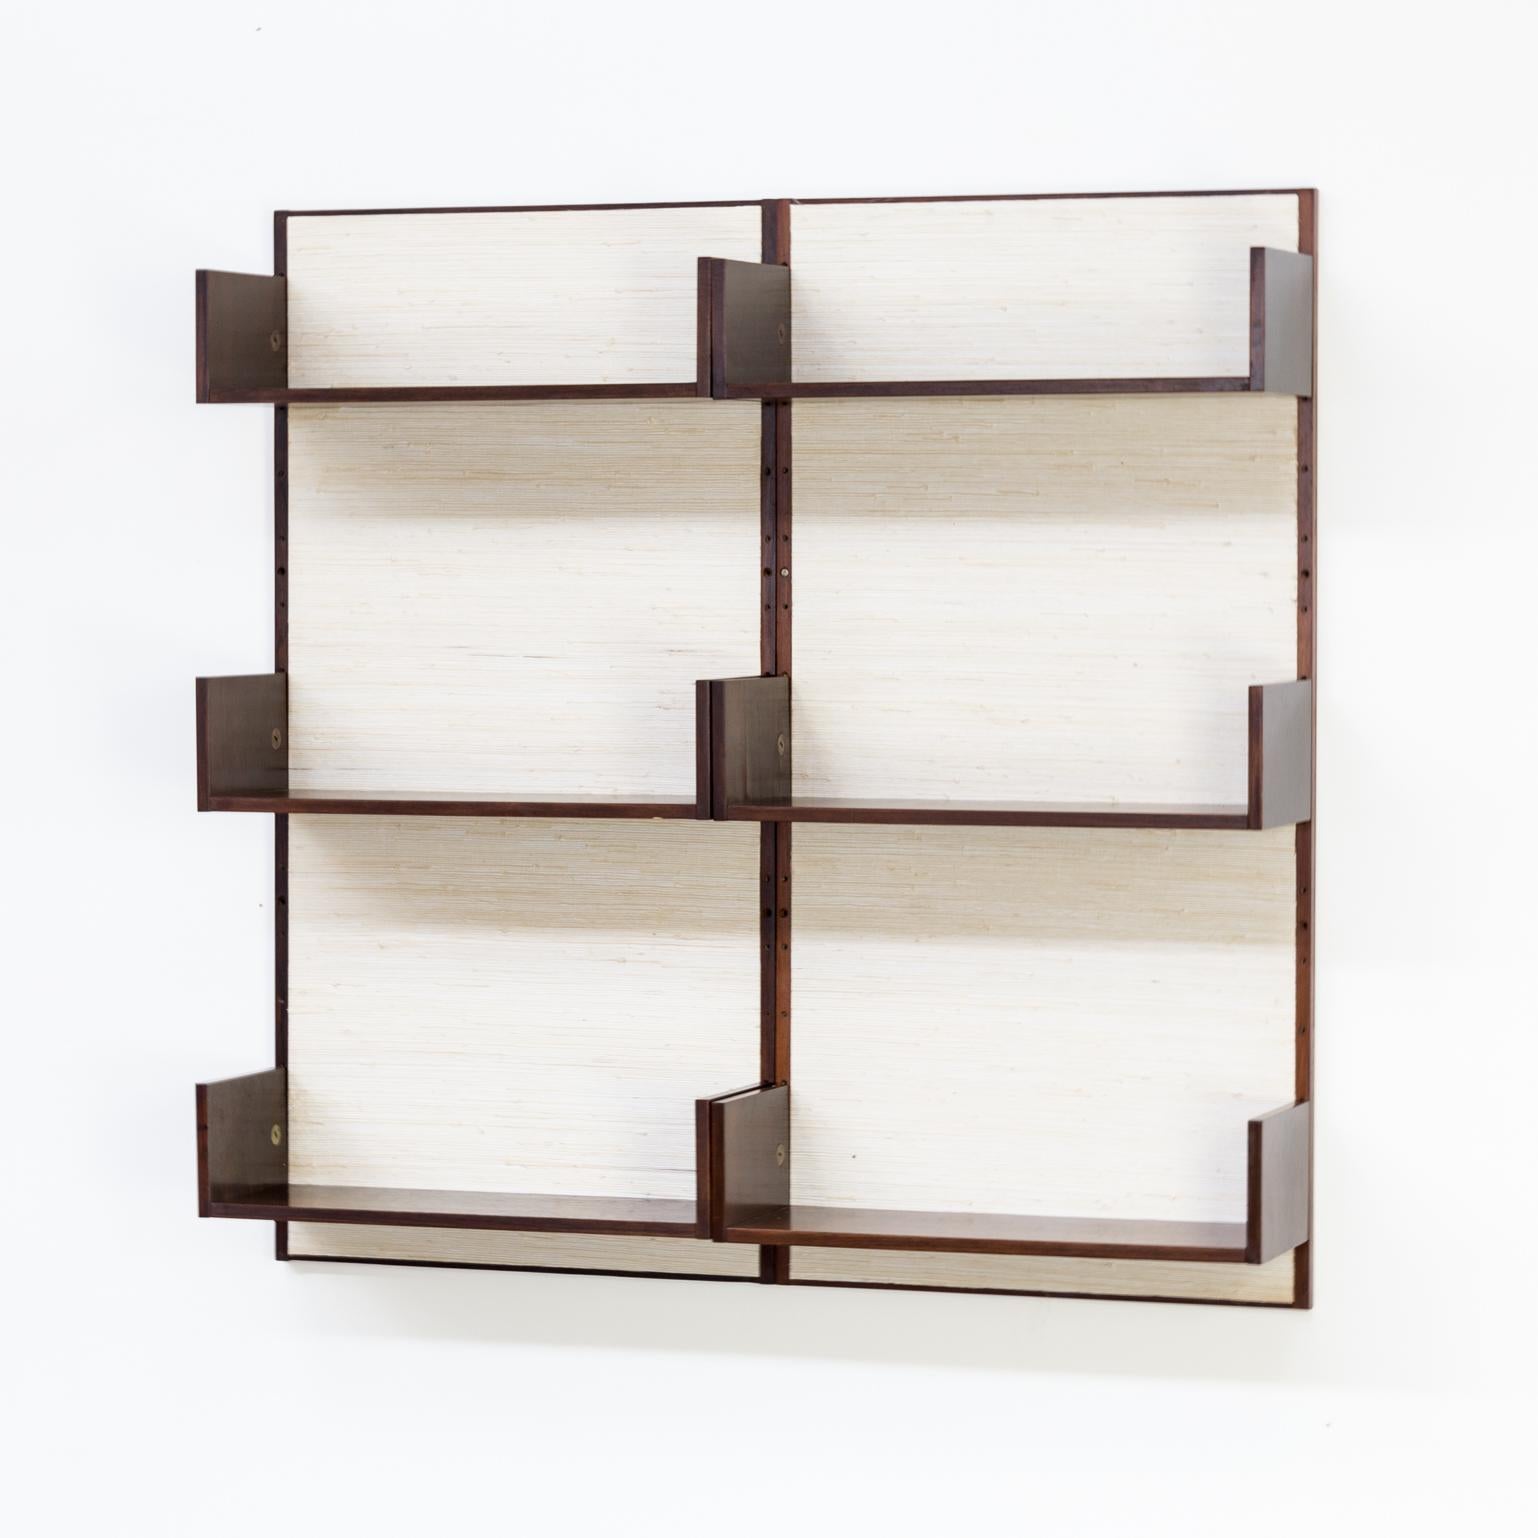 1960s Marten Franckema rosewood and seagrass canvas wall unit 6 shelves for Fristho. Good condition consistent with age and use.